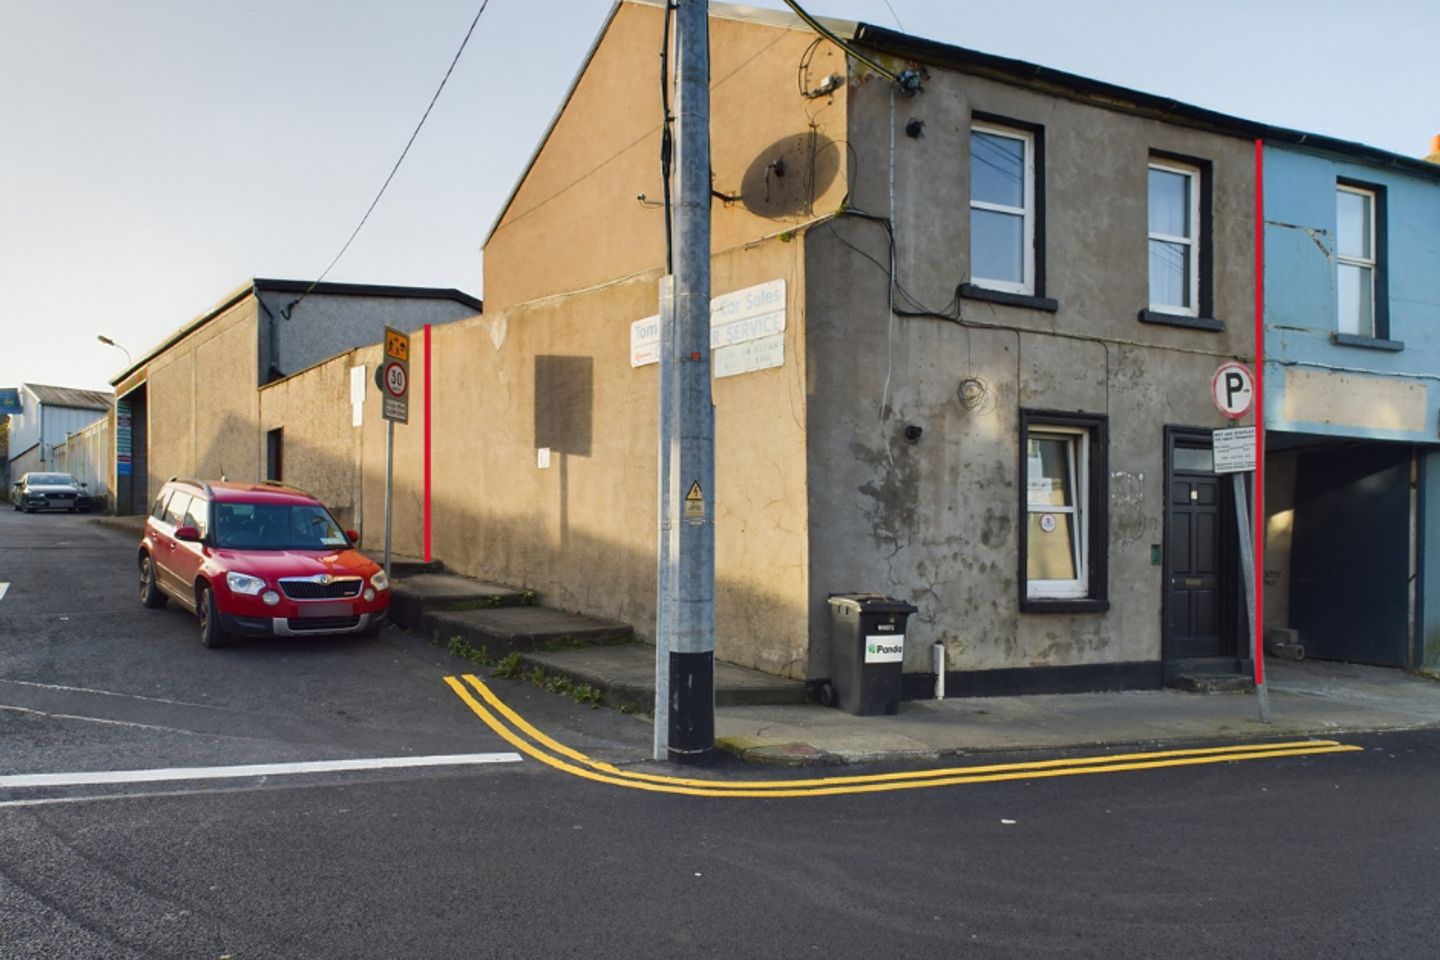 Apartment 1 & 2, 44 Morgan Street, Waterford City, Co. Waterford